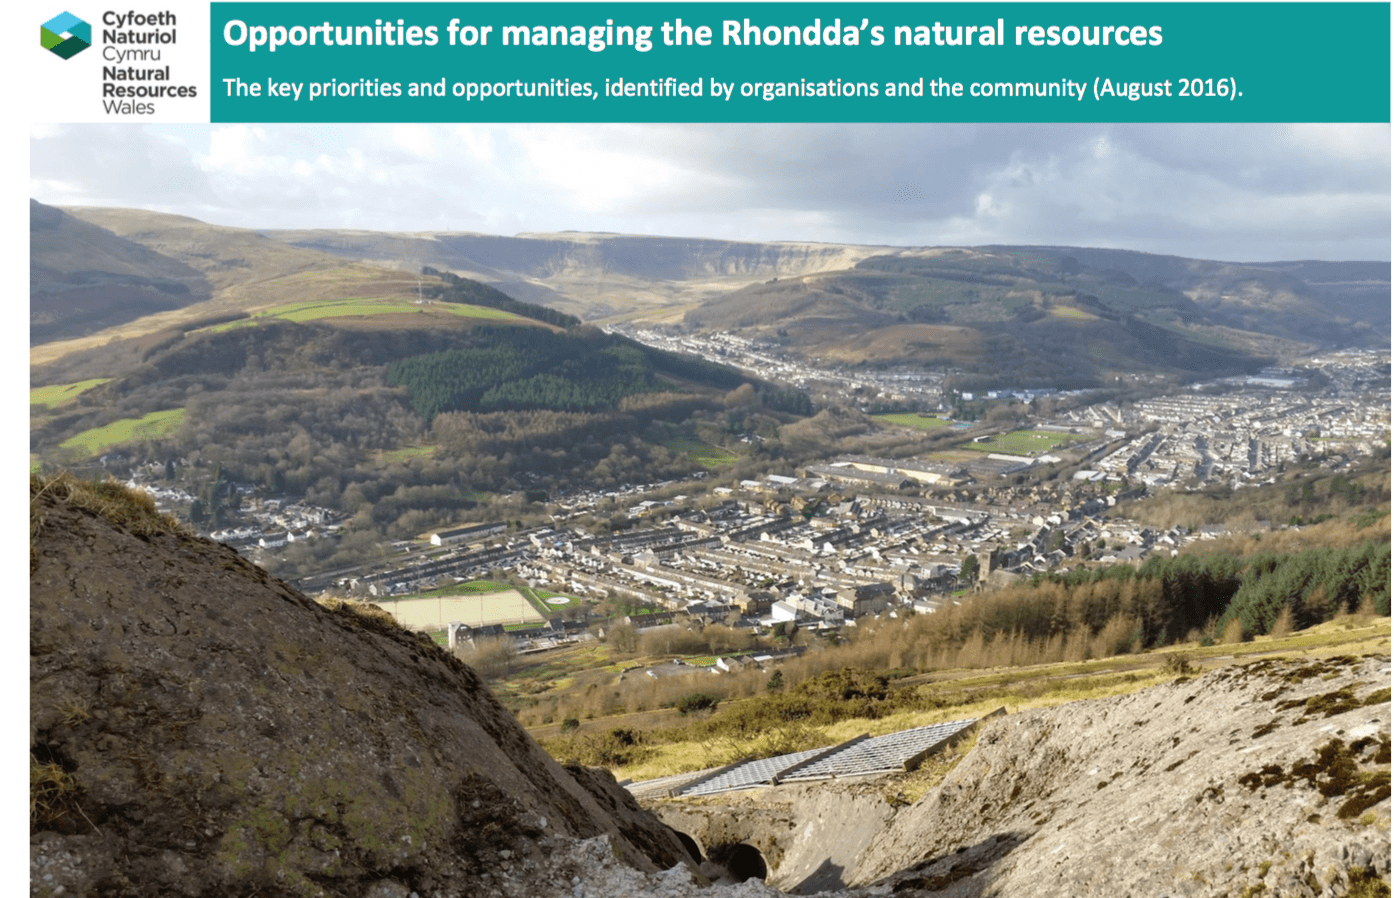 Opportunities for Managing the Rhondda’s Natural Resources – Natural Resources Wales